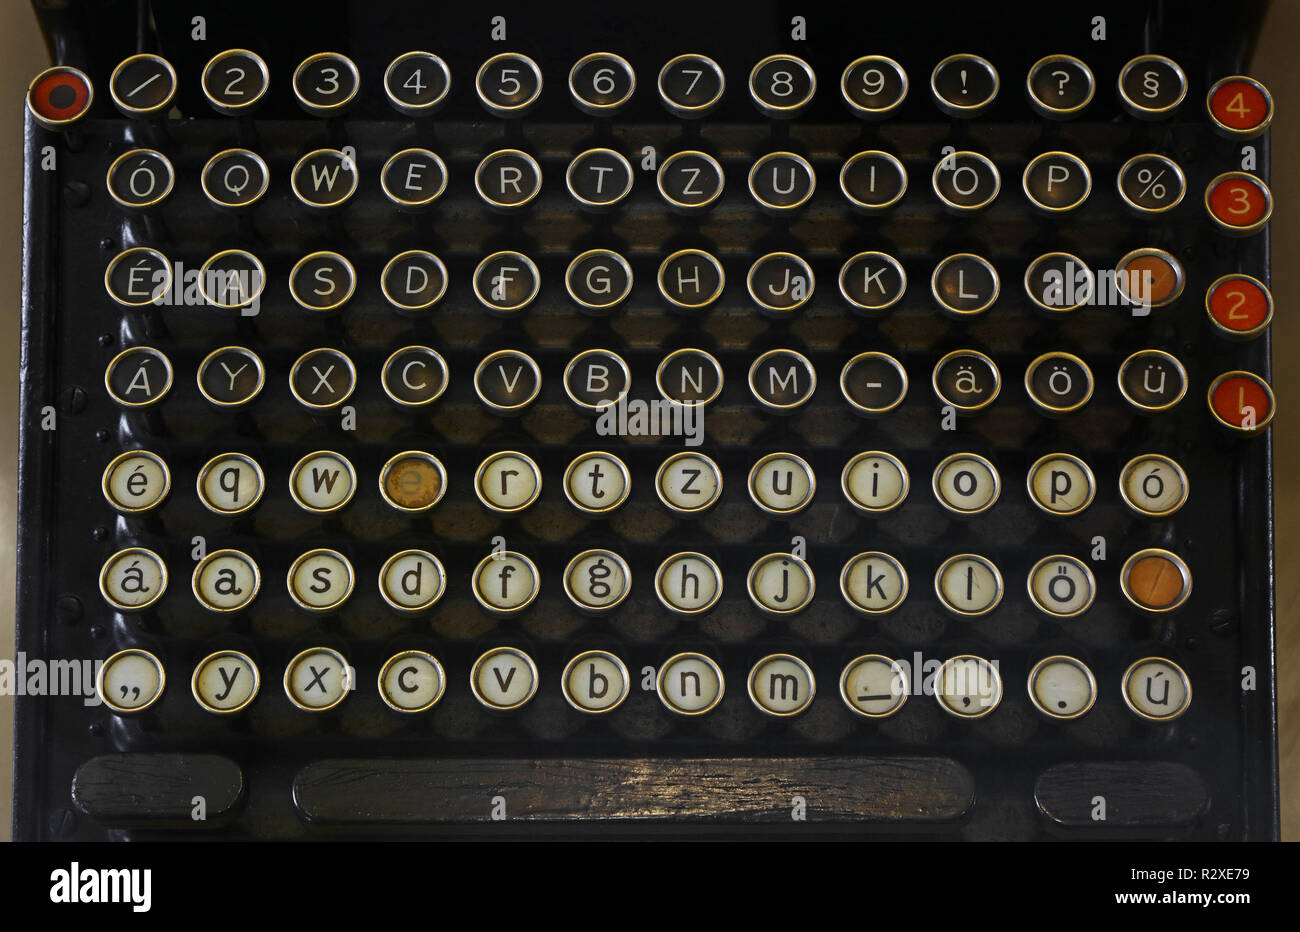 Latinic keyboard of old vintage antique typewriter with round buttons close up, high angle view, personal perspective Stock Photo